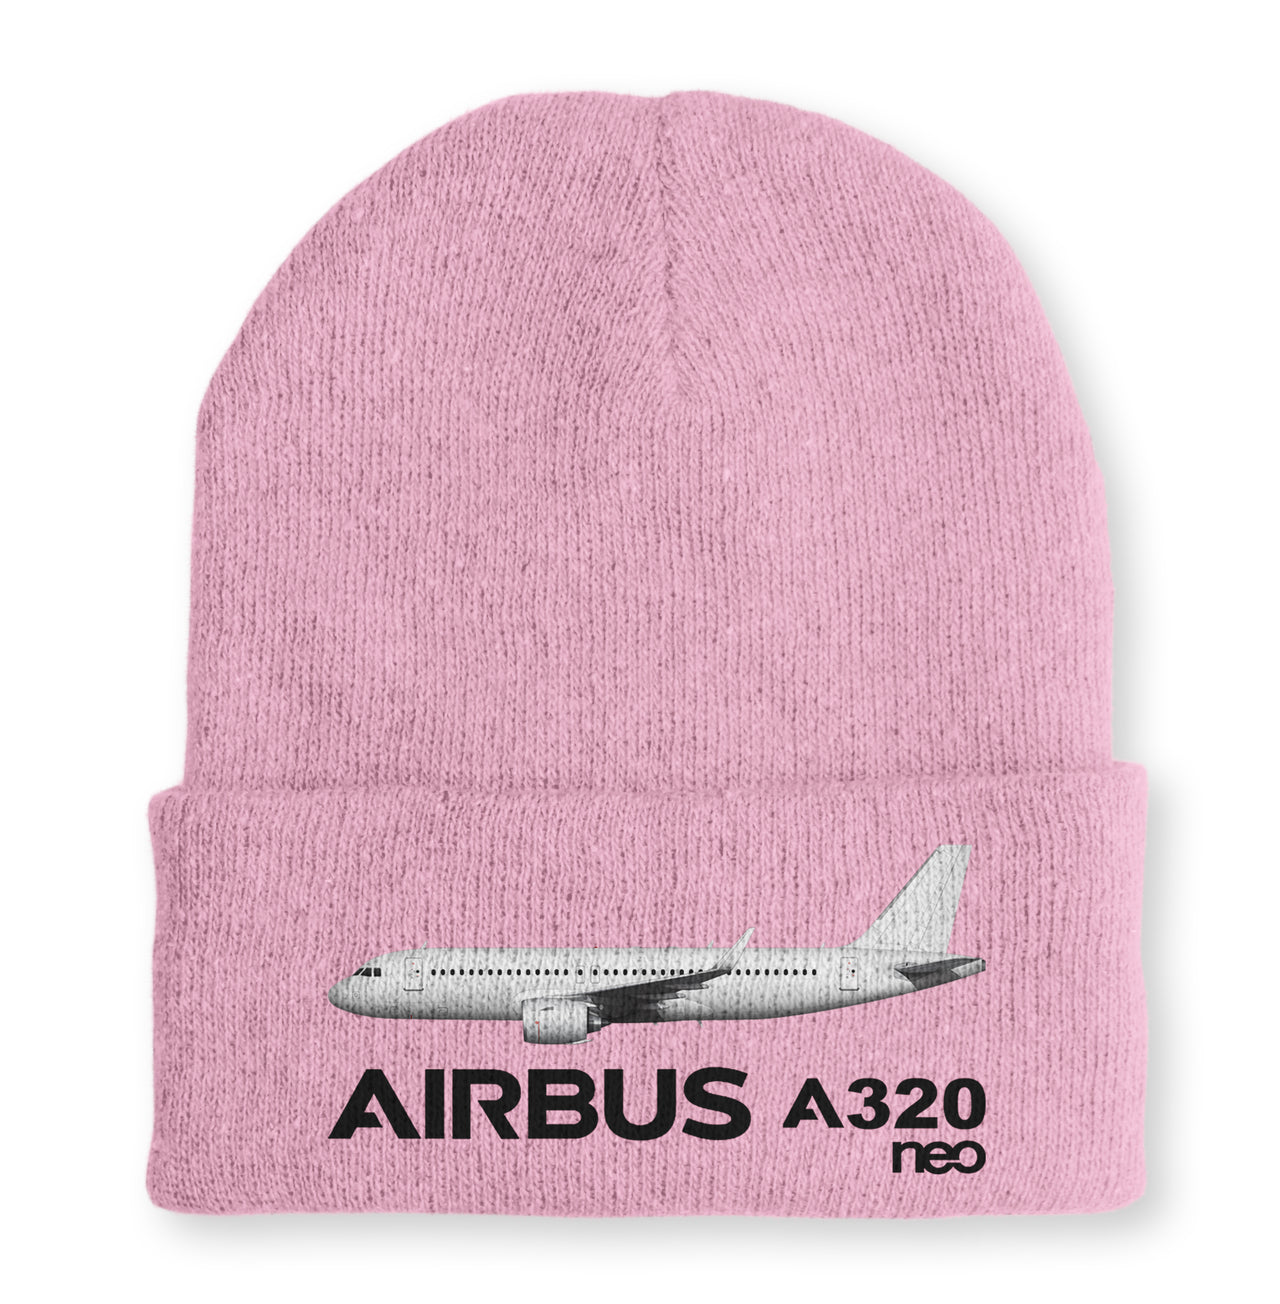 The Airbus A320Neo Embroidered Beanies